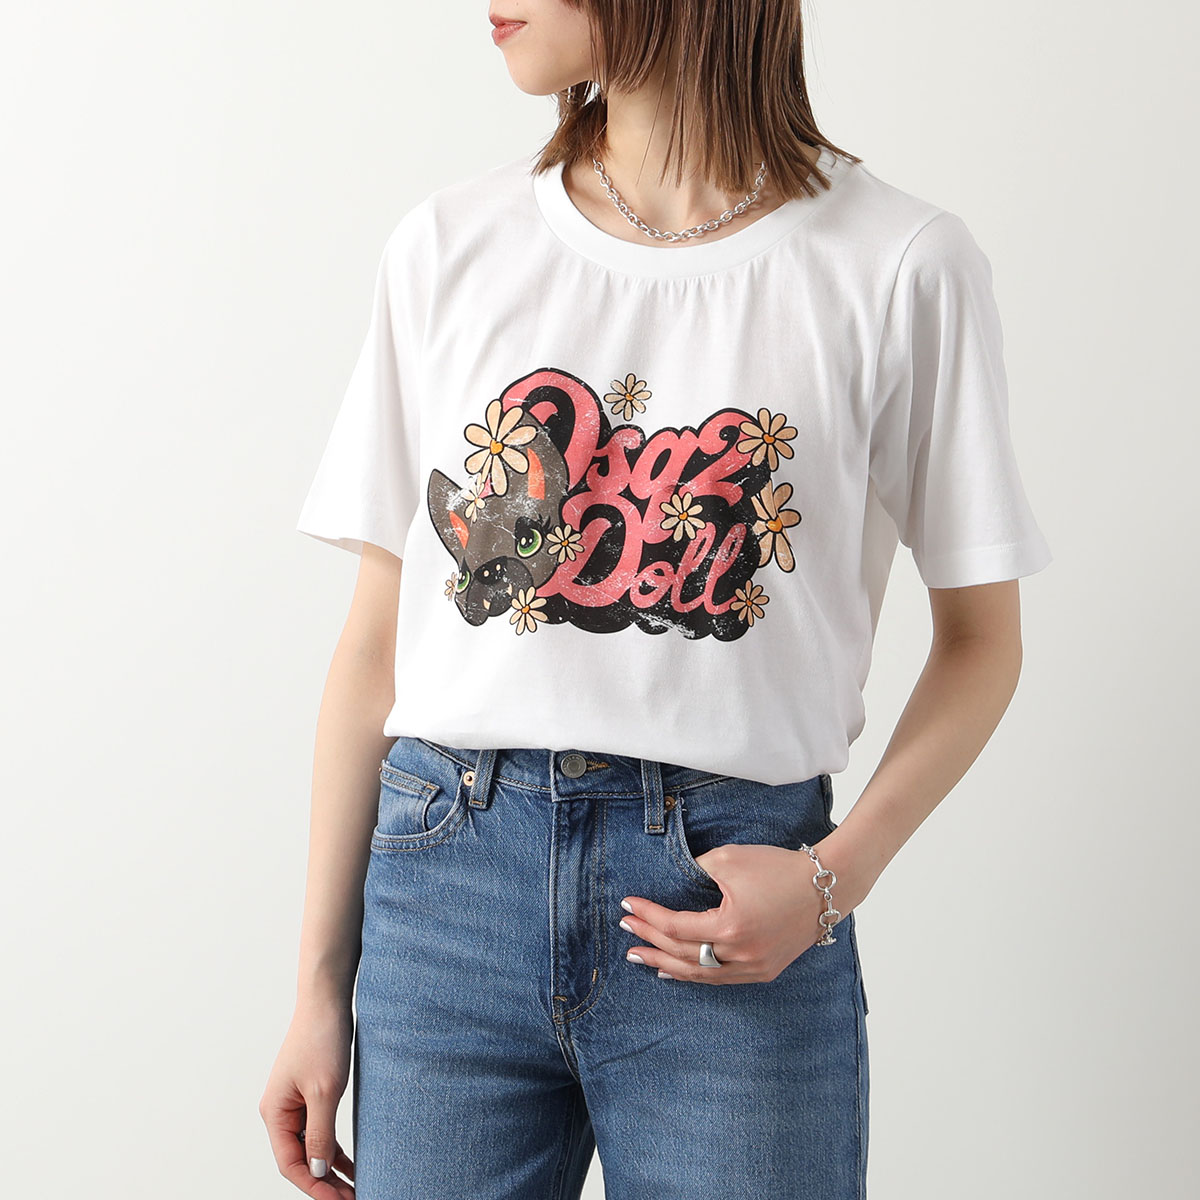 DSQUARED2 ディースクエアード Tシャツ HILDE DOLL EASY FIT S75GD0399 S24668 レディース 半袖  カットソー ロゴT カラー2色